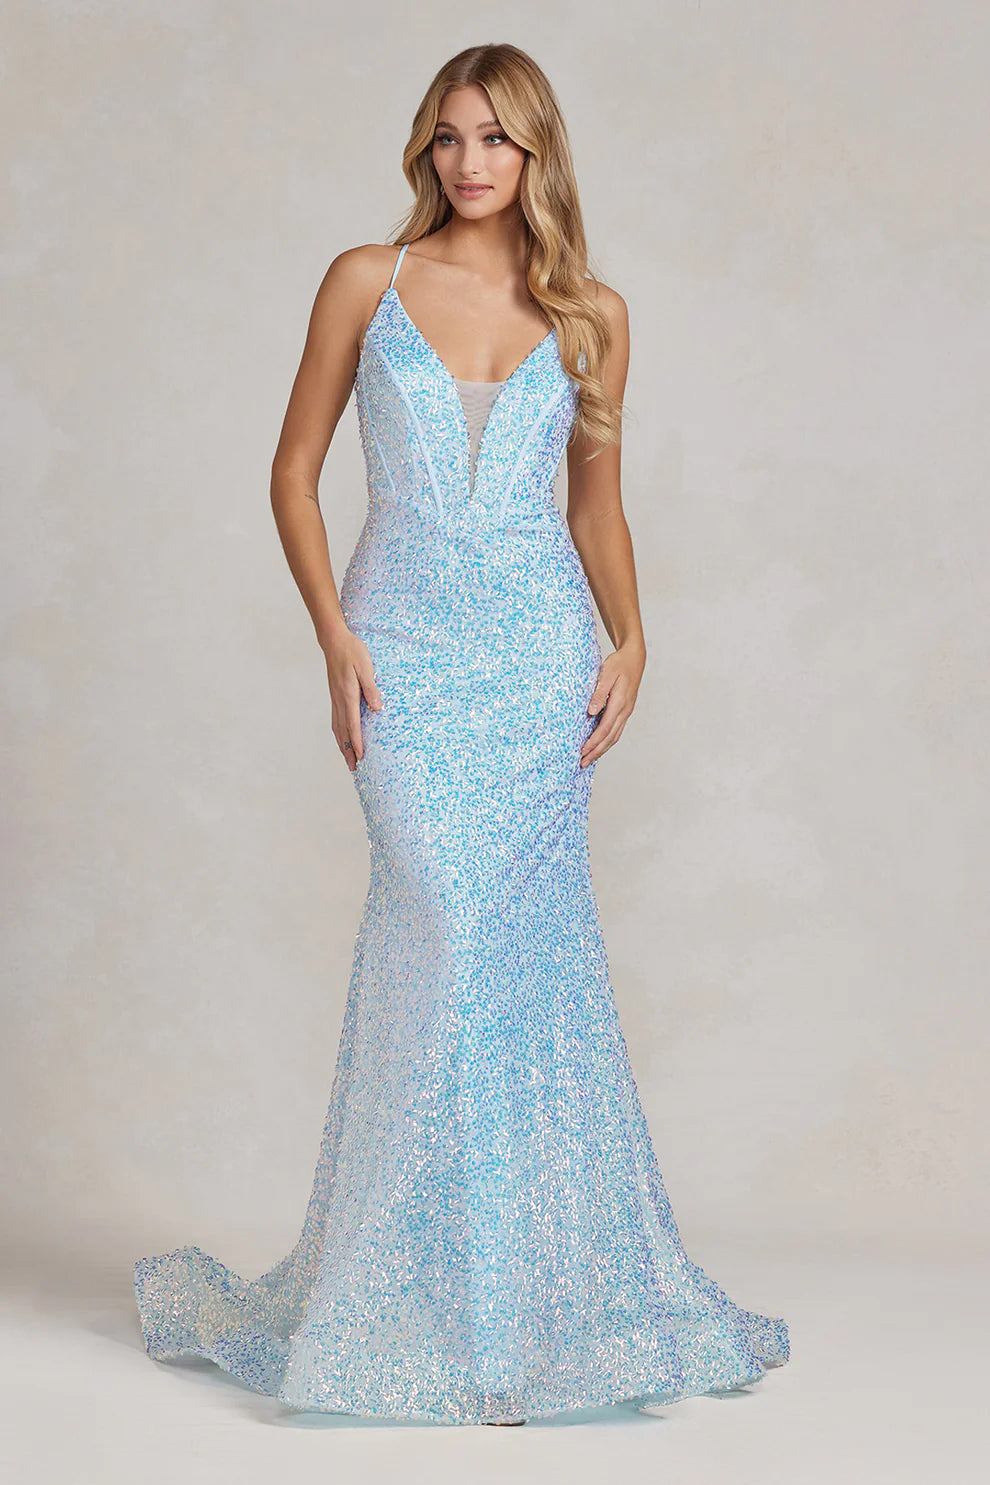 NOX ANABEL C1094 Long Fitted Sequin Mermaid Prom Dress